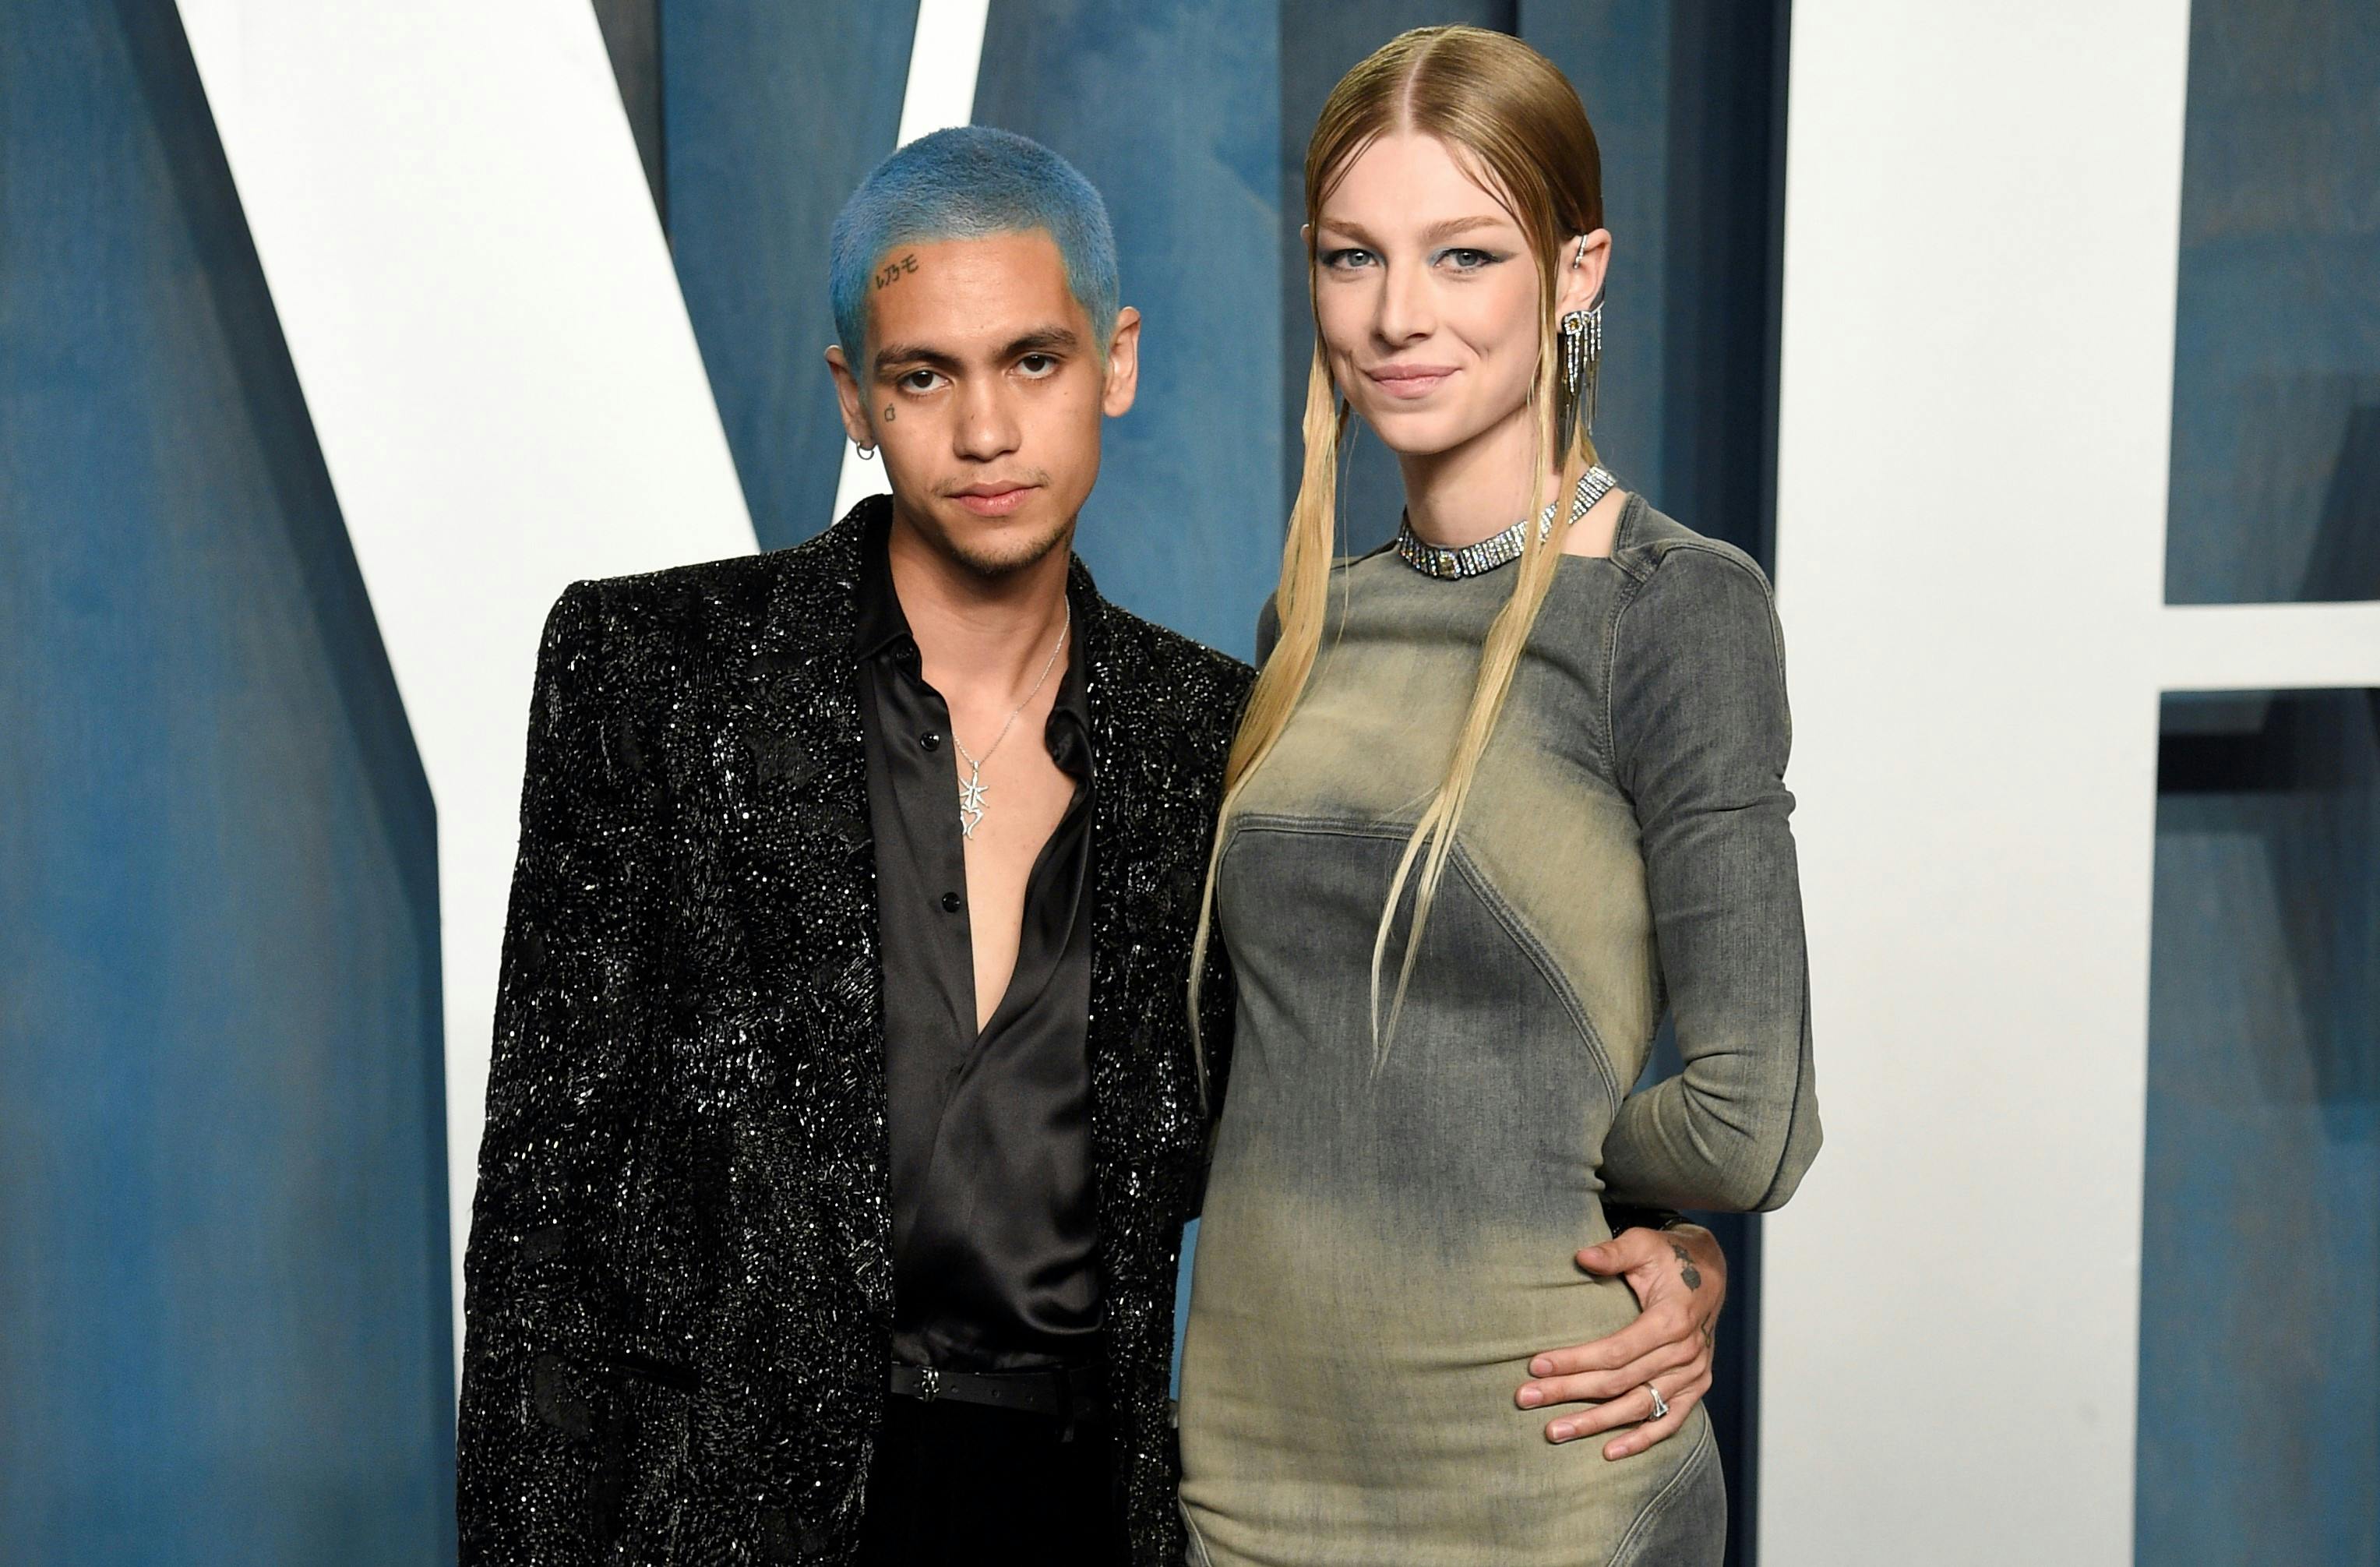 Dominic Fike, left, and Hunter Schafer arrive at the Vanity Fair Oscar Party on Sunday, March 27, 2022, at the Wallis Annenberg Center for the Performing Arts in Beverly Hills, Calif. (Photo by Evan Agostini/Invision/AP)